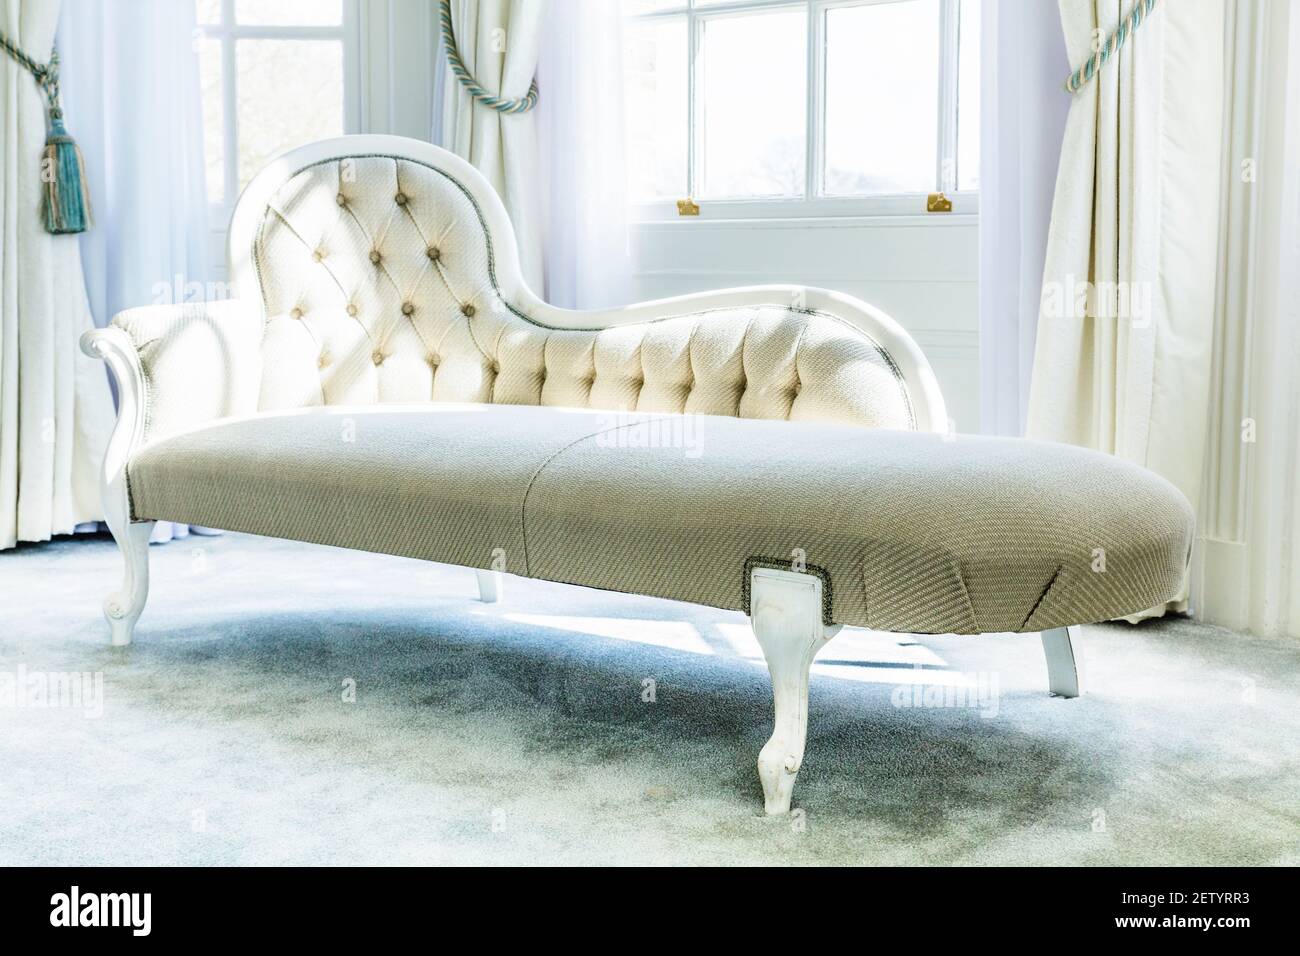 Classic Chaise Lounge in a luxurious setting Stock Photo - Alamy